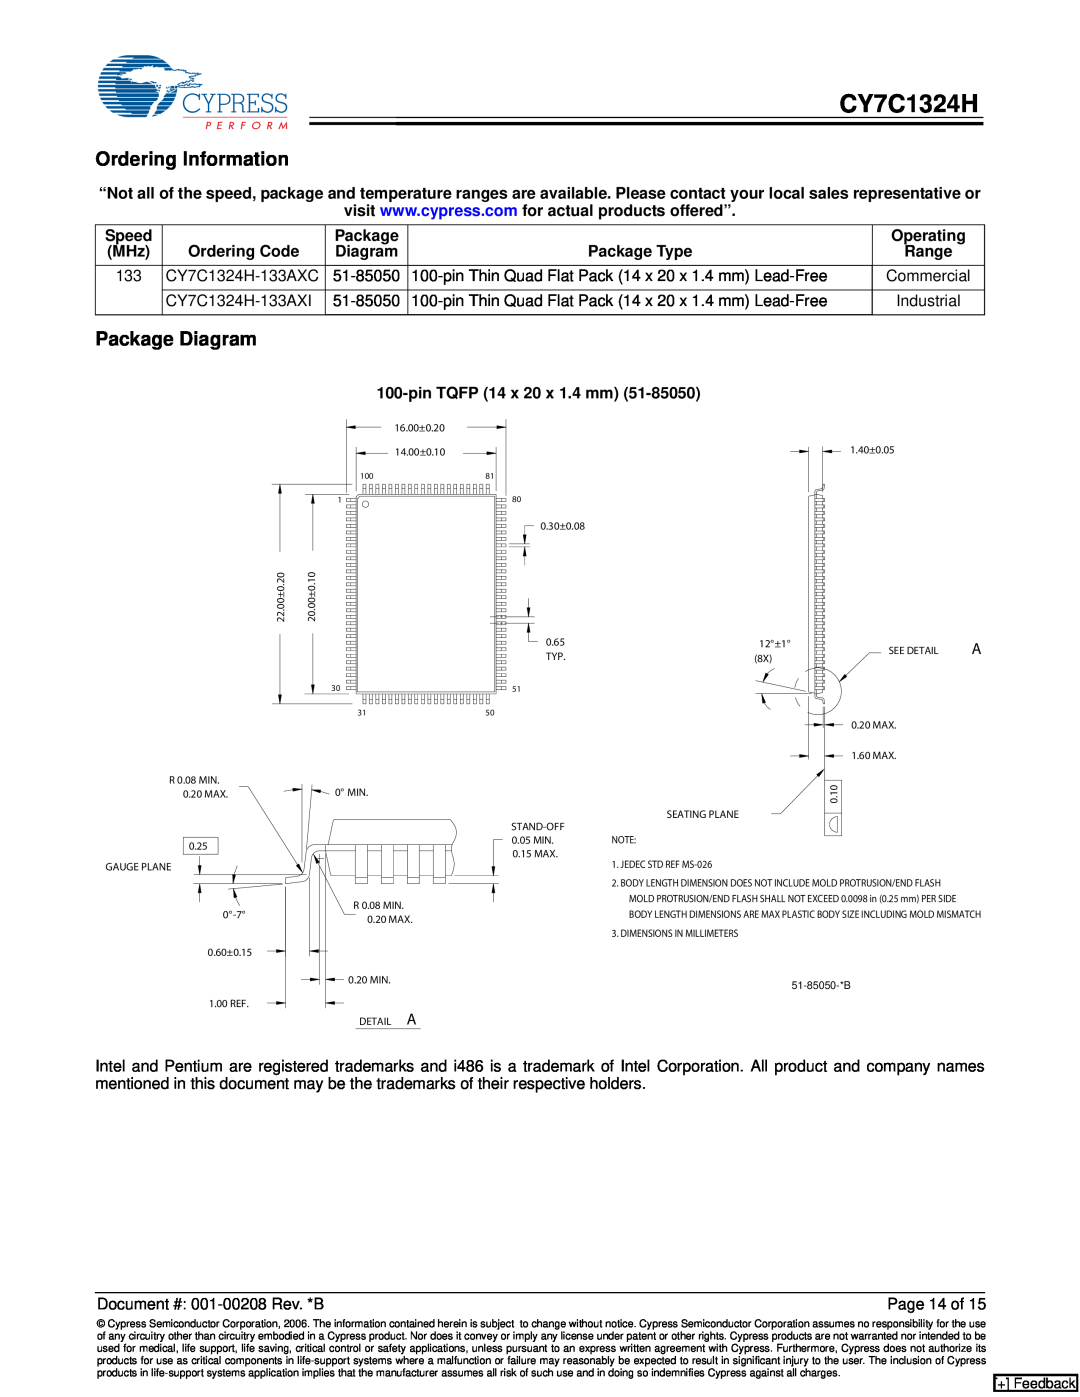 Cypress CY7C1324H manual Ordering Information, Package Diagram, Commercial, Industrial, Page 14 of 